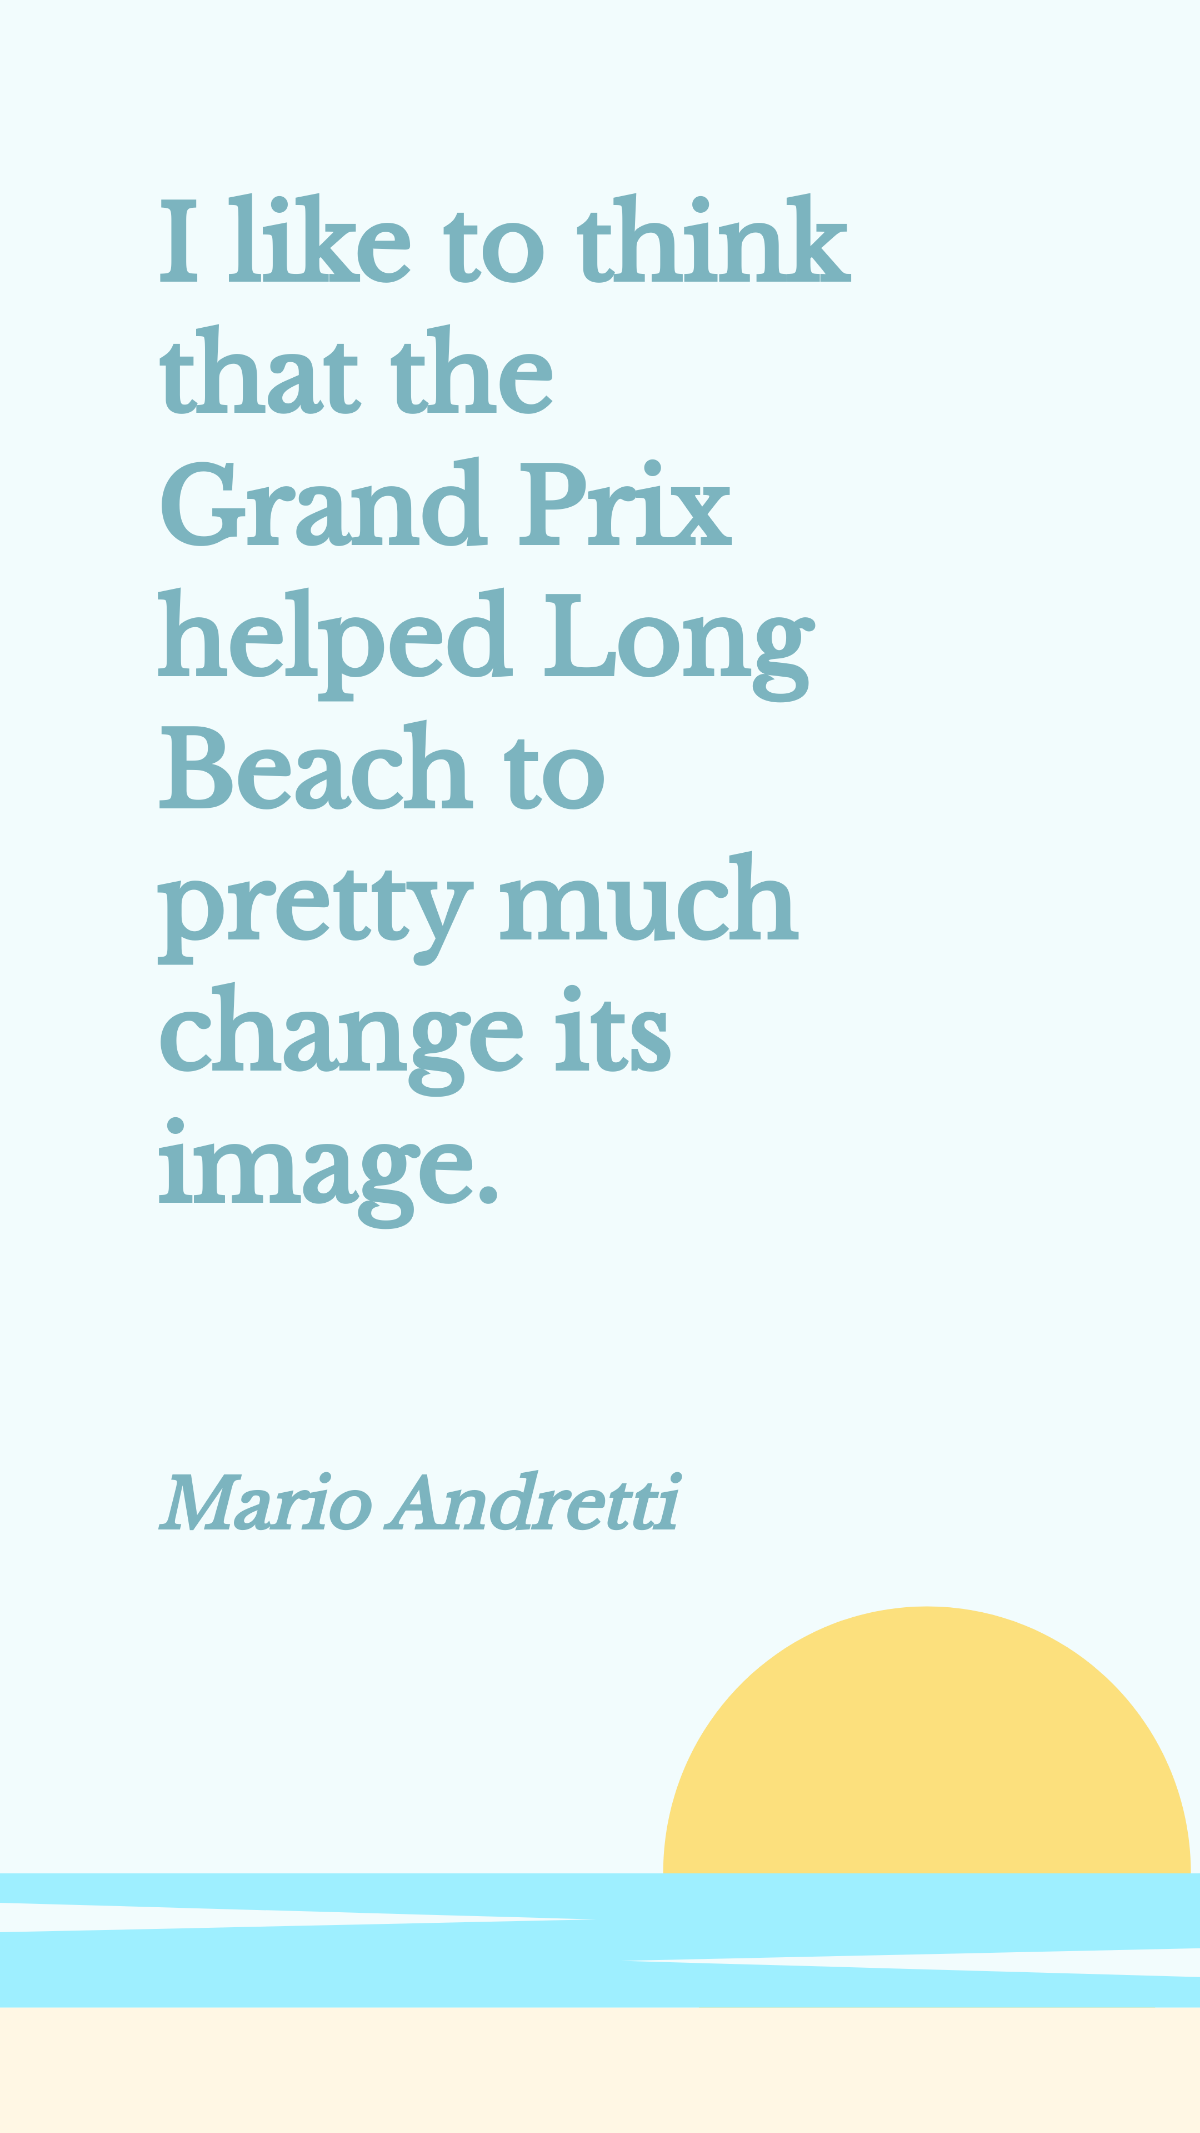 Mario Andretti - I like to think that the Grand Prix helped Long Beach to pretty much change its image.